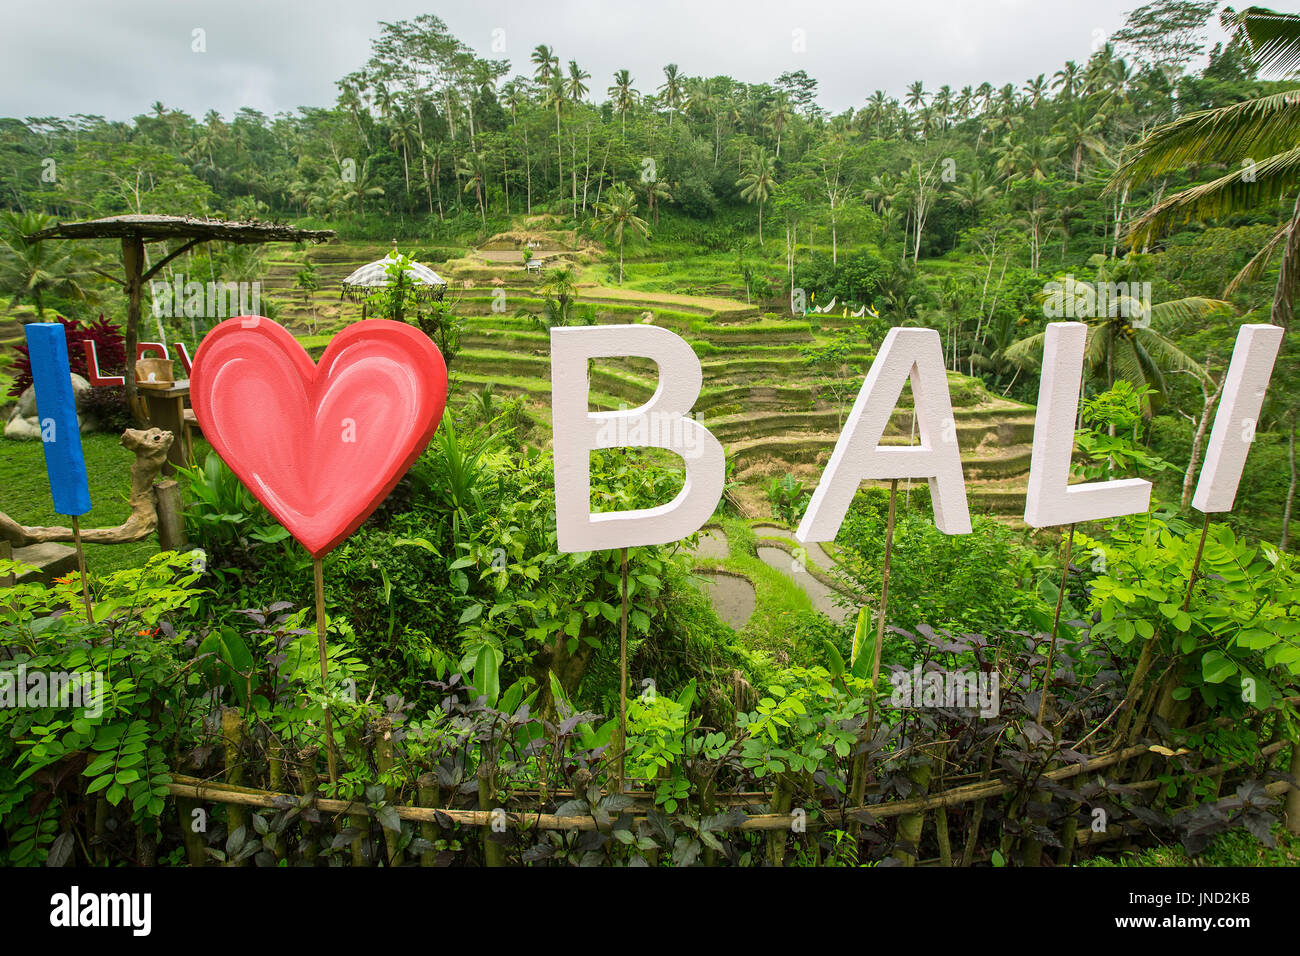 I Love Bali text written on the green rice terraces. Indonesia. Stock Photo